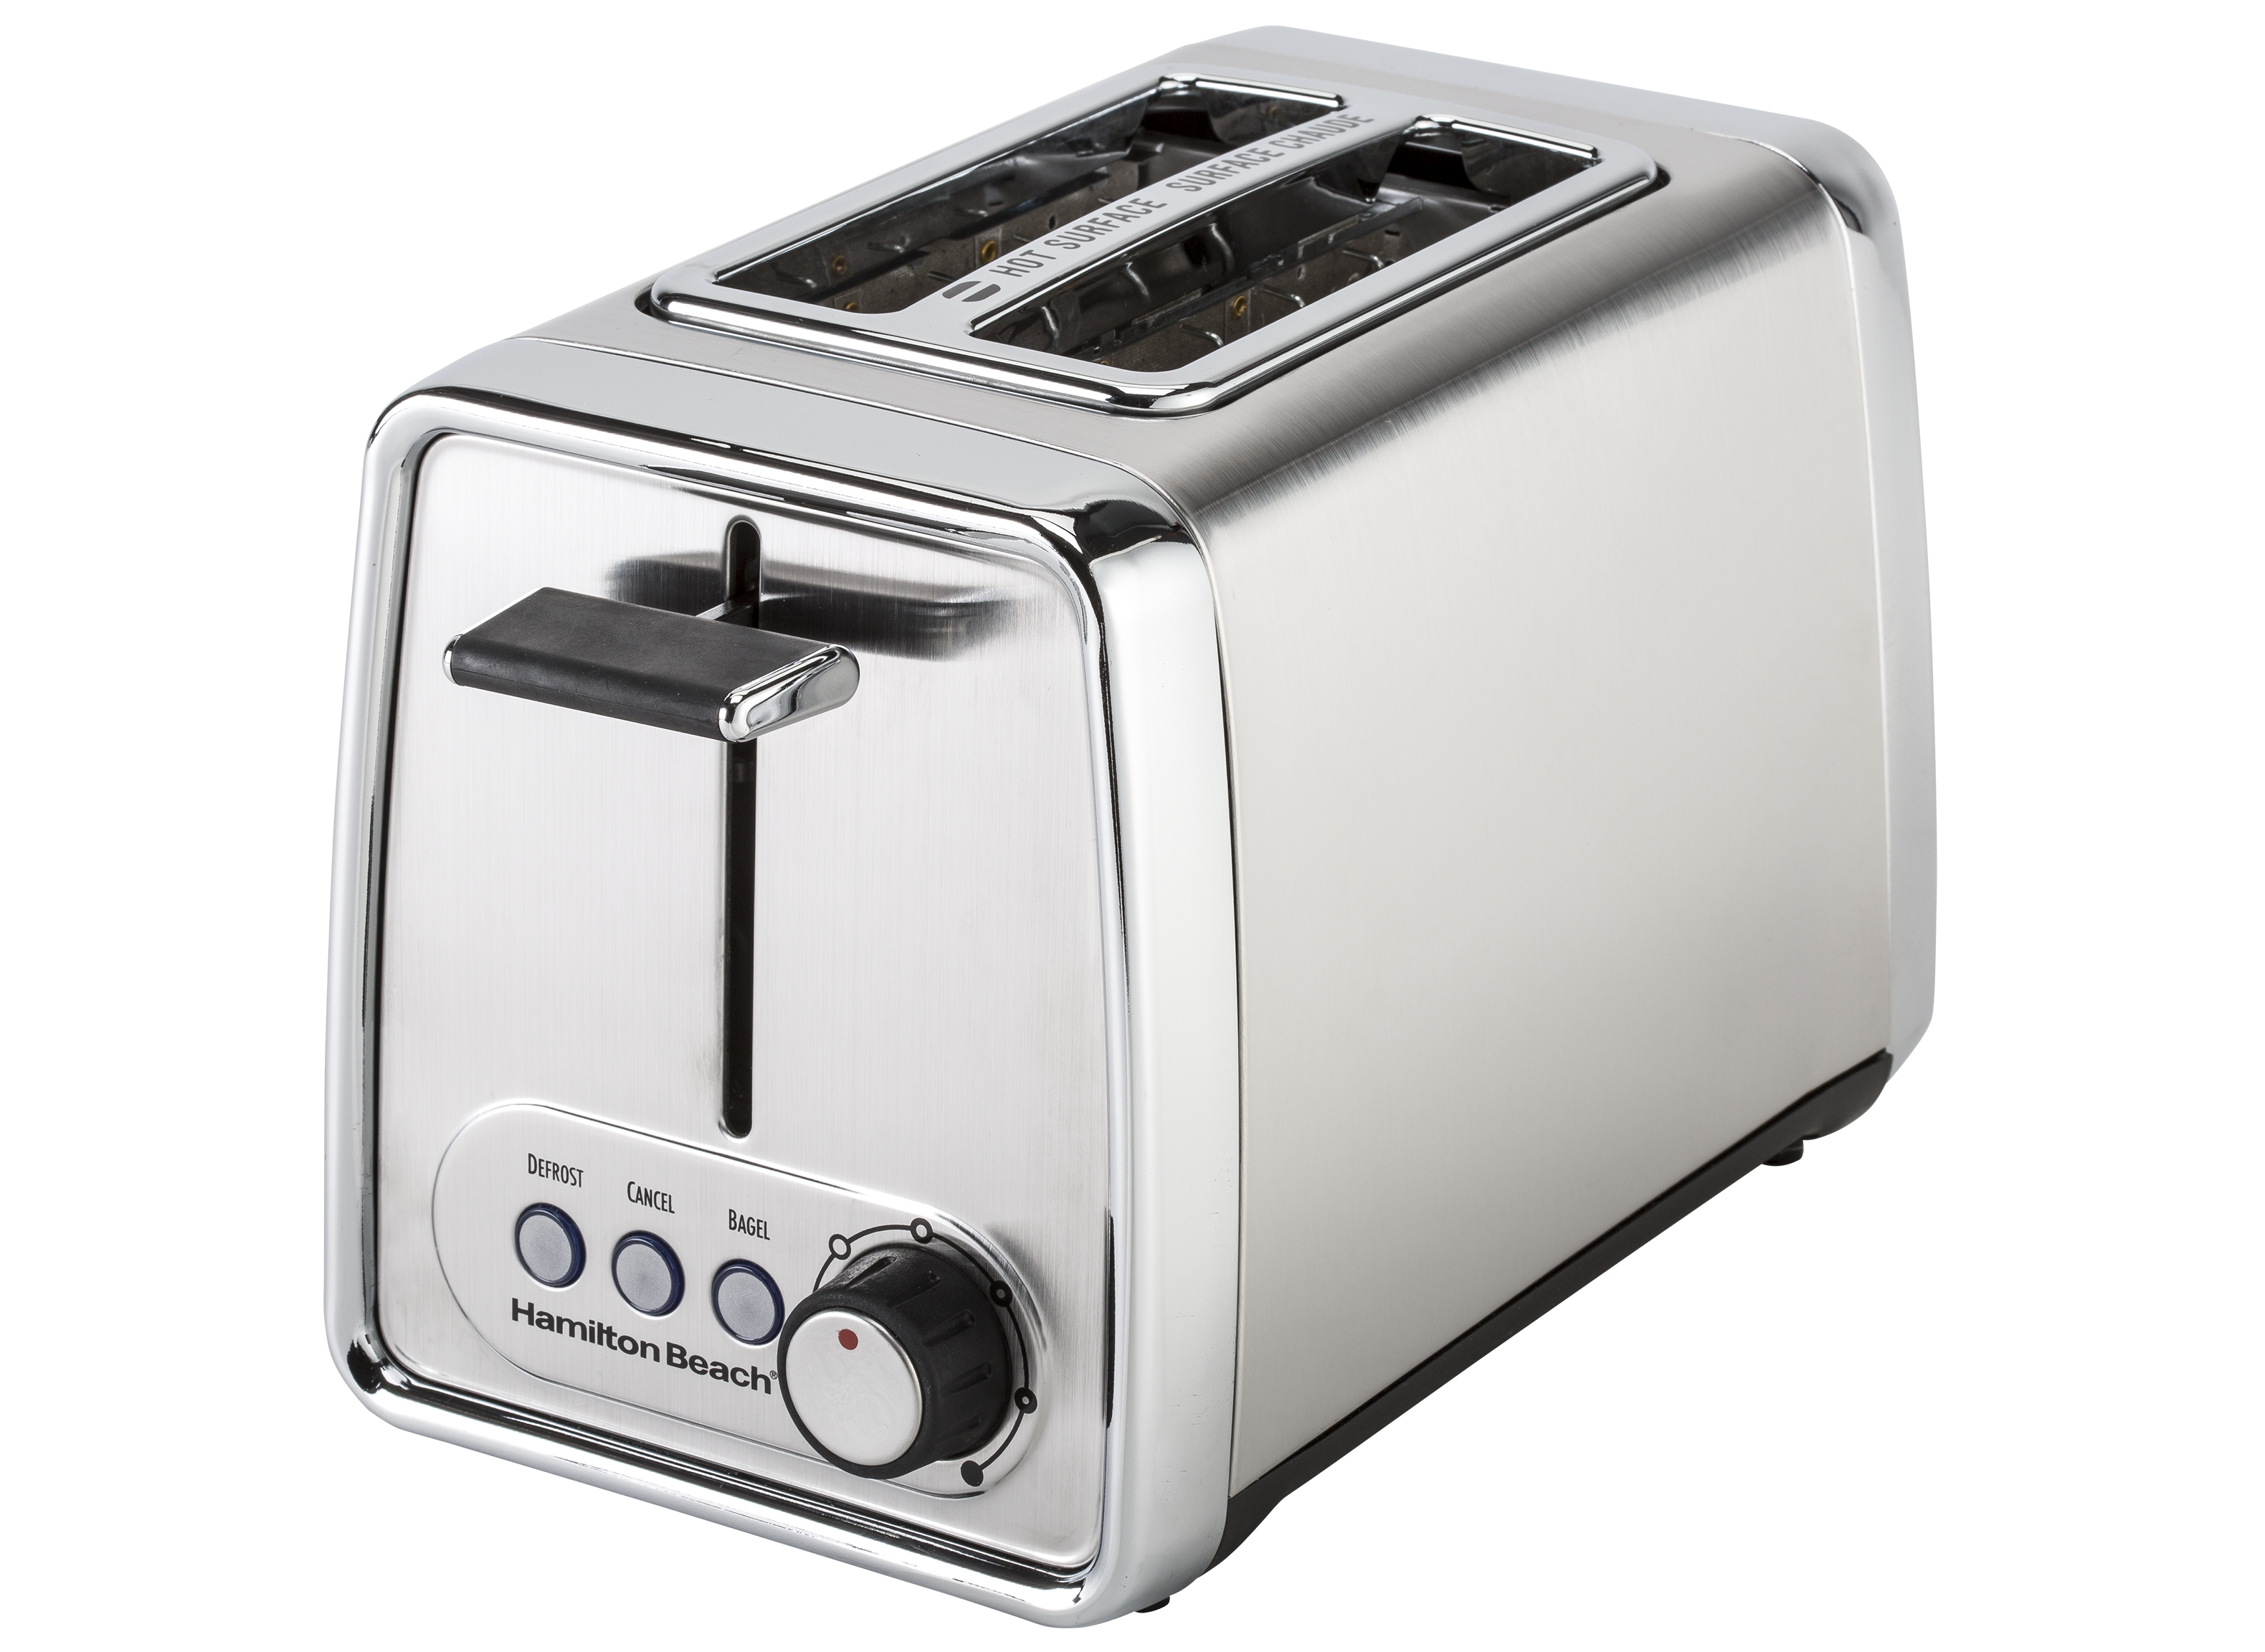 https://crdms.images.consumerreports.org/prod/products/cr/models/389611-toasters-hamiltonbeach-2slicemodernchrome22791.png